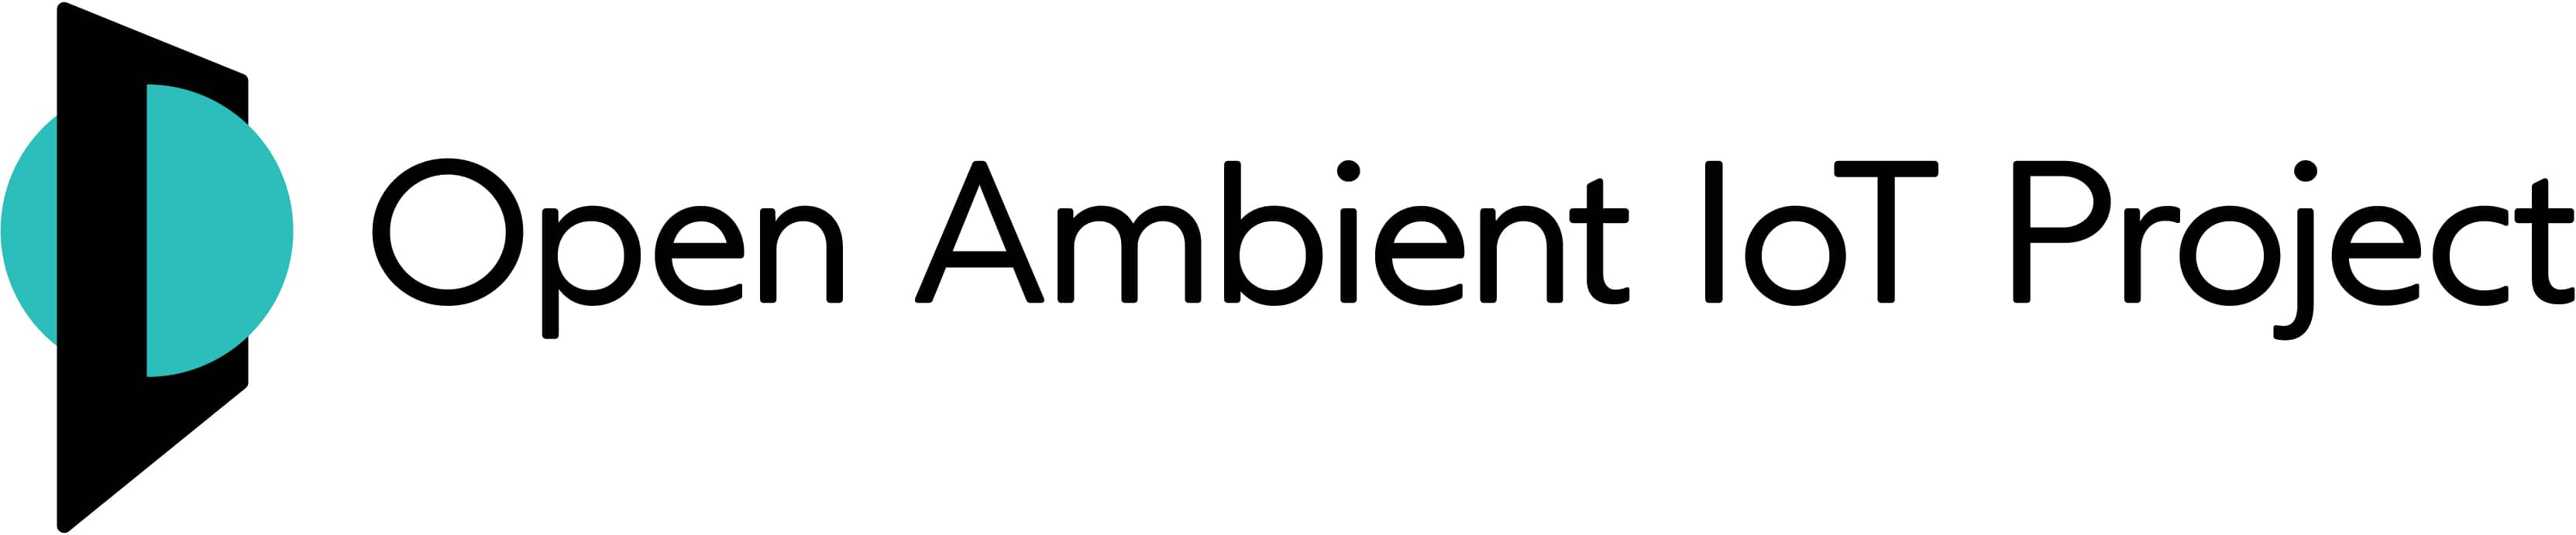 Open Ambient IoT Project logo